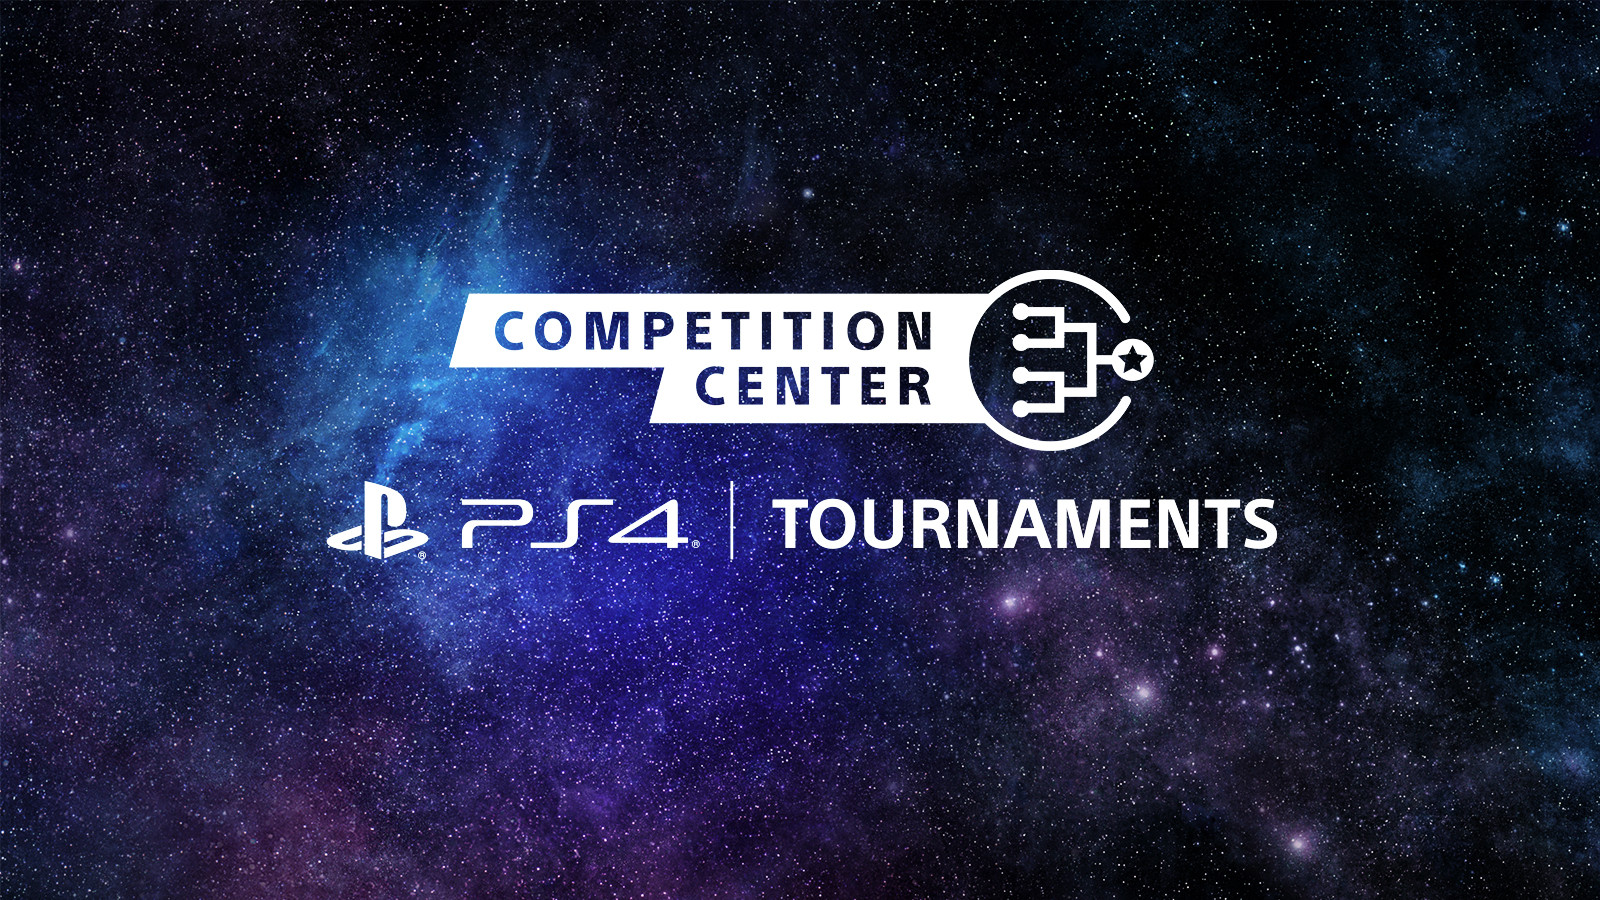 Jim Ryan: PlayStation 5 will get Tournaments Feature